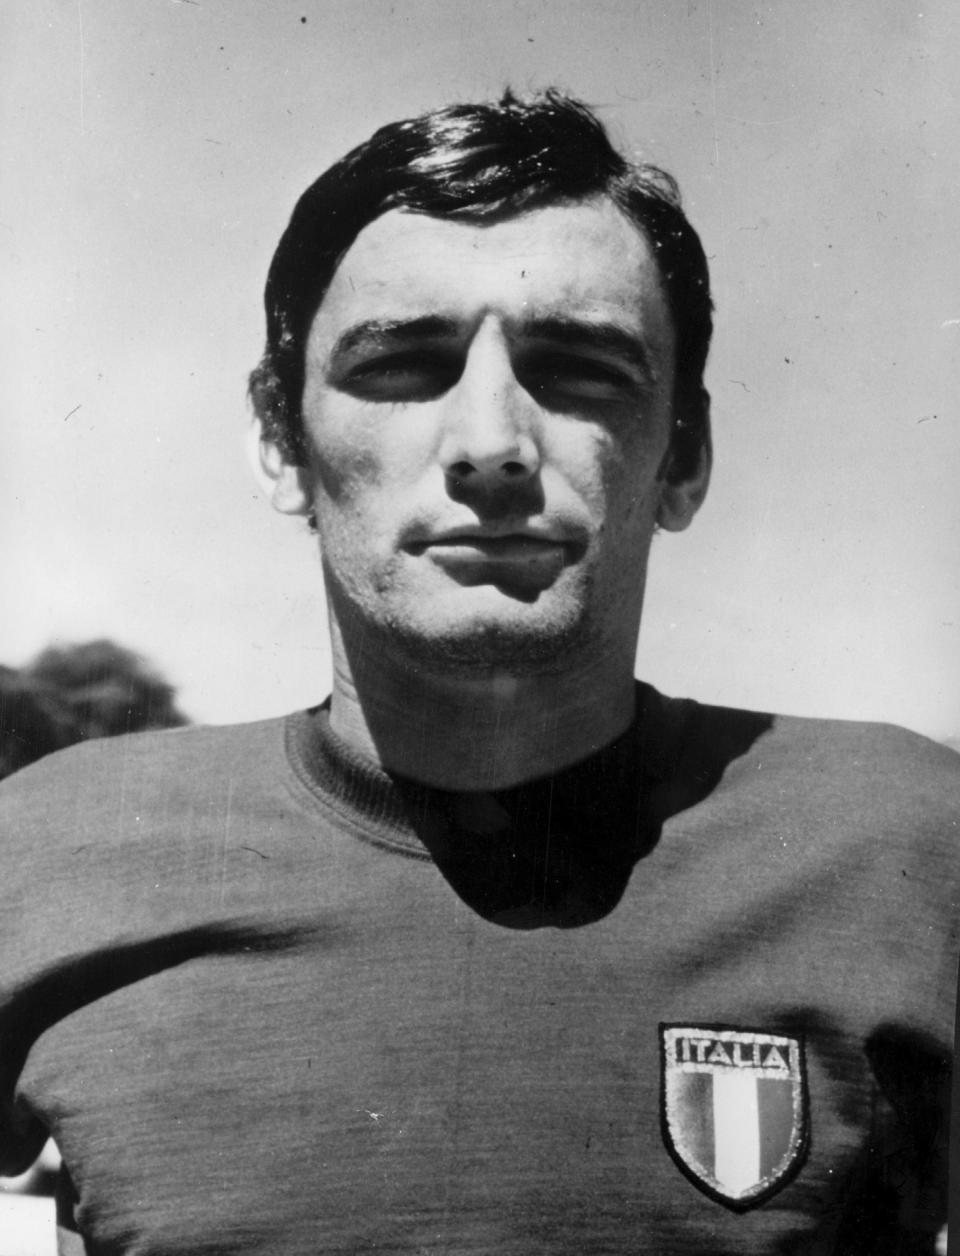 Italy’s all-time leading goalscorer Luigi Riva, shown in this undated file photo, has died. He was 79. The Italian soccer federation has confirmed the news and tributes have started flooding in for Riva. Riva remains Italy’s leading goalscorer, having netted 35 times in 42 appearances. As a player, he helped the Azzurri win the European Championship in 1968 and finish runners-up at the World Cup, two years later.He was also team manager of the national team from 1990-2013 and was instrumental in Italy winning its fourth World Cup in 2006. (Lapresse via AP)